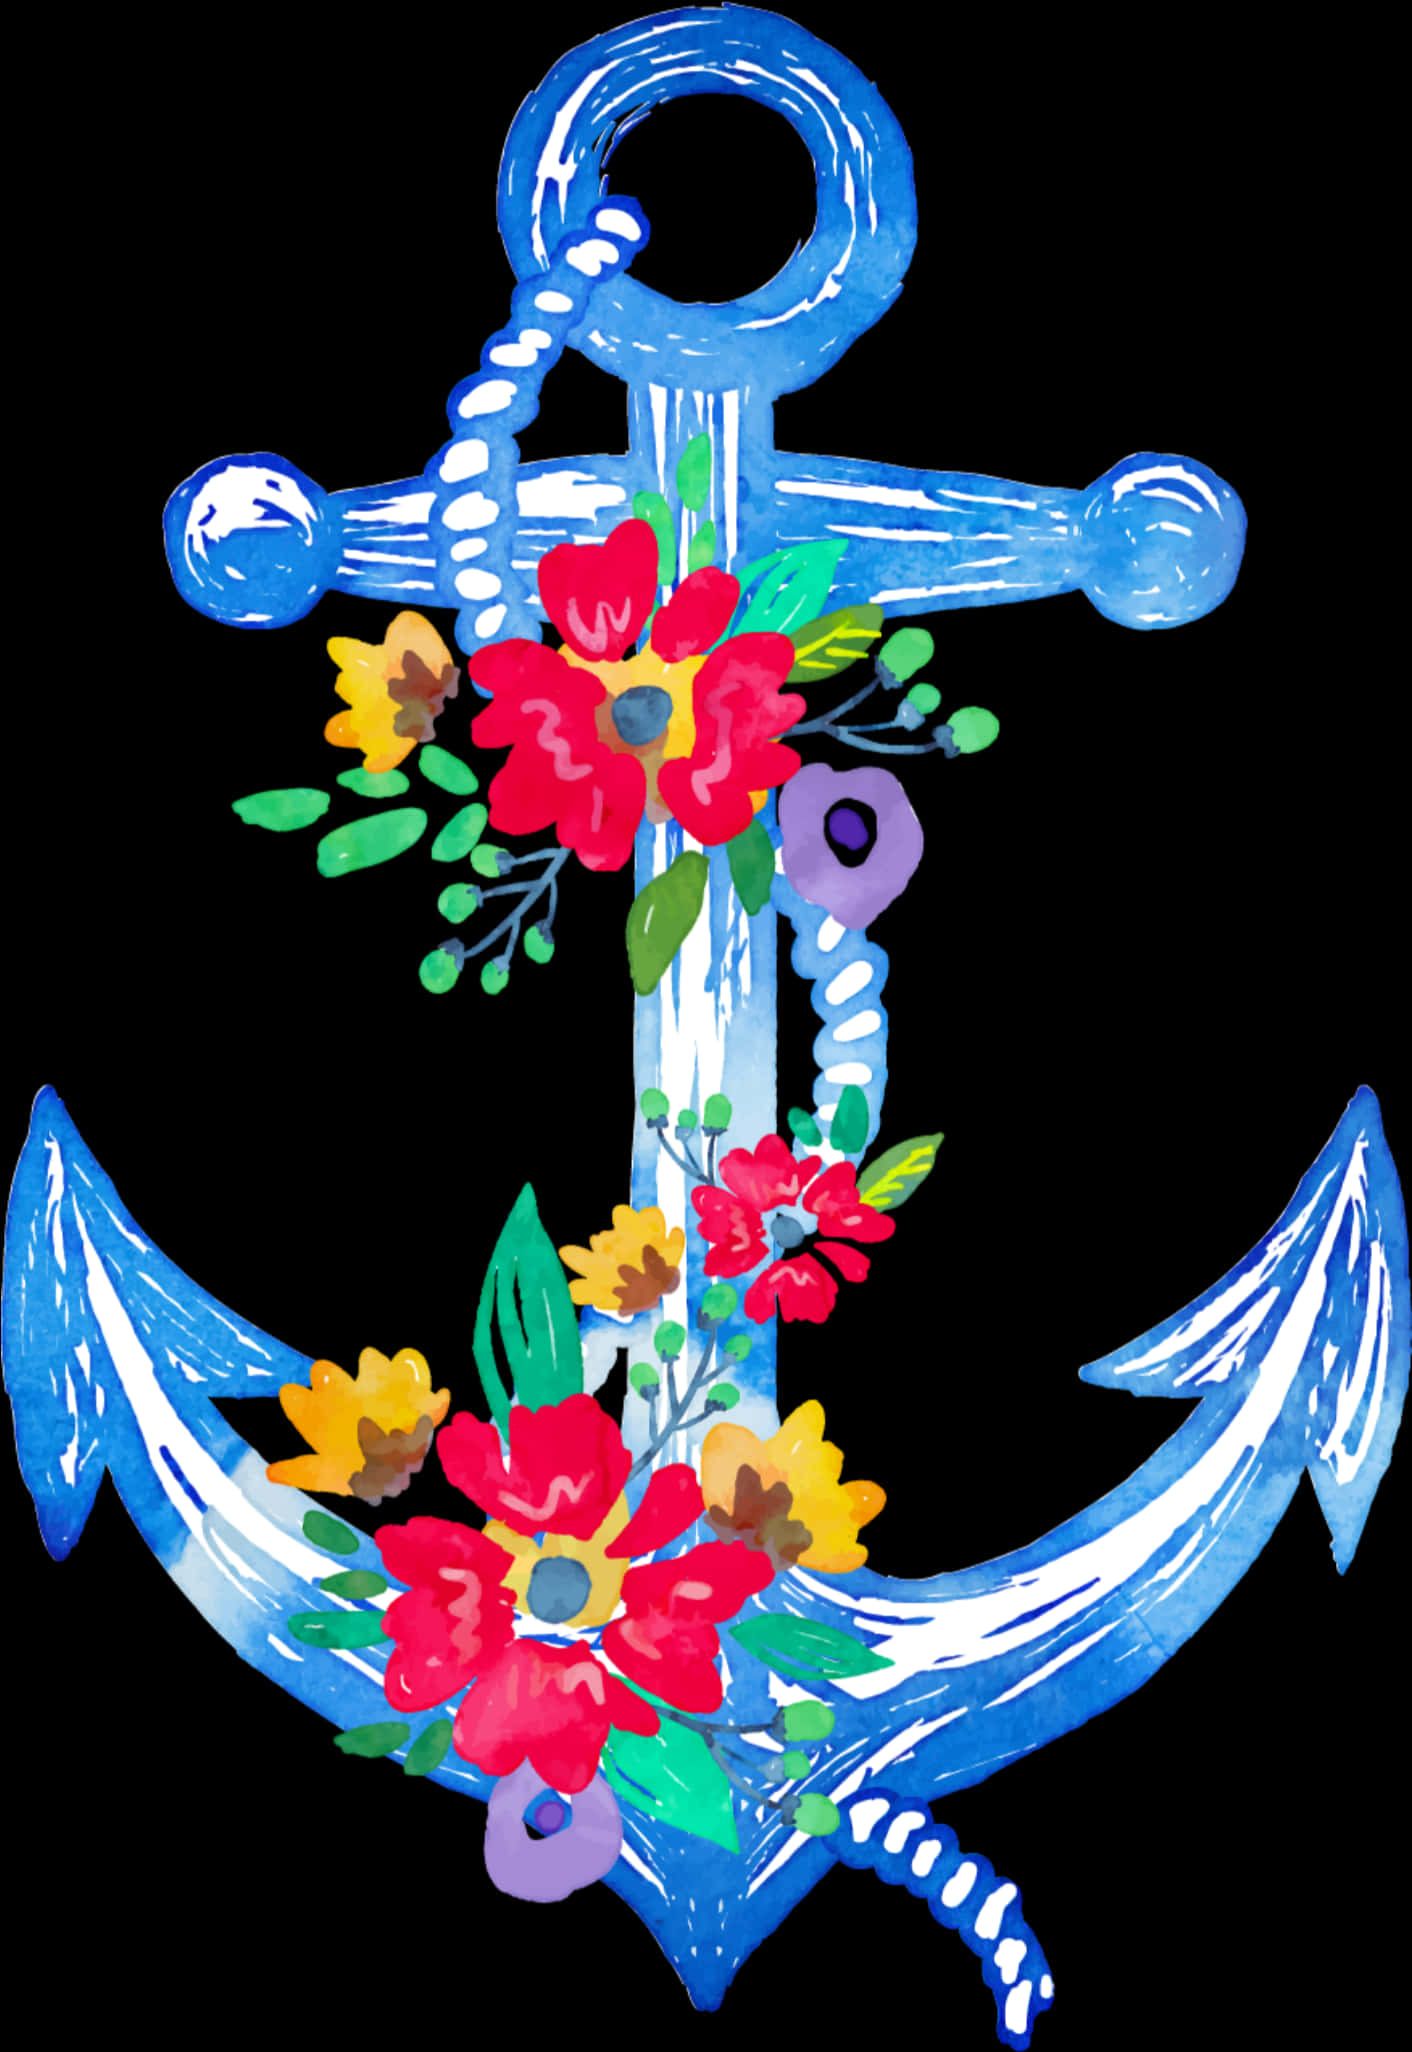 A Blue Anchor With Flowers On It